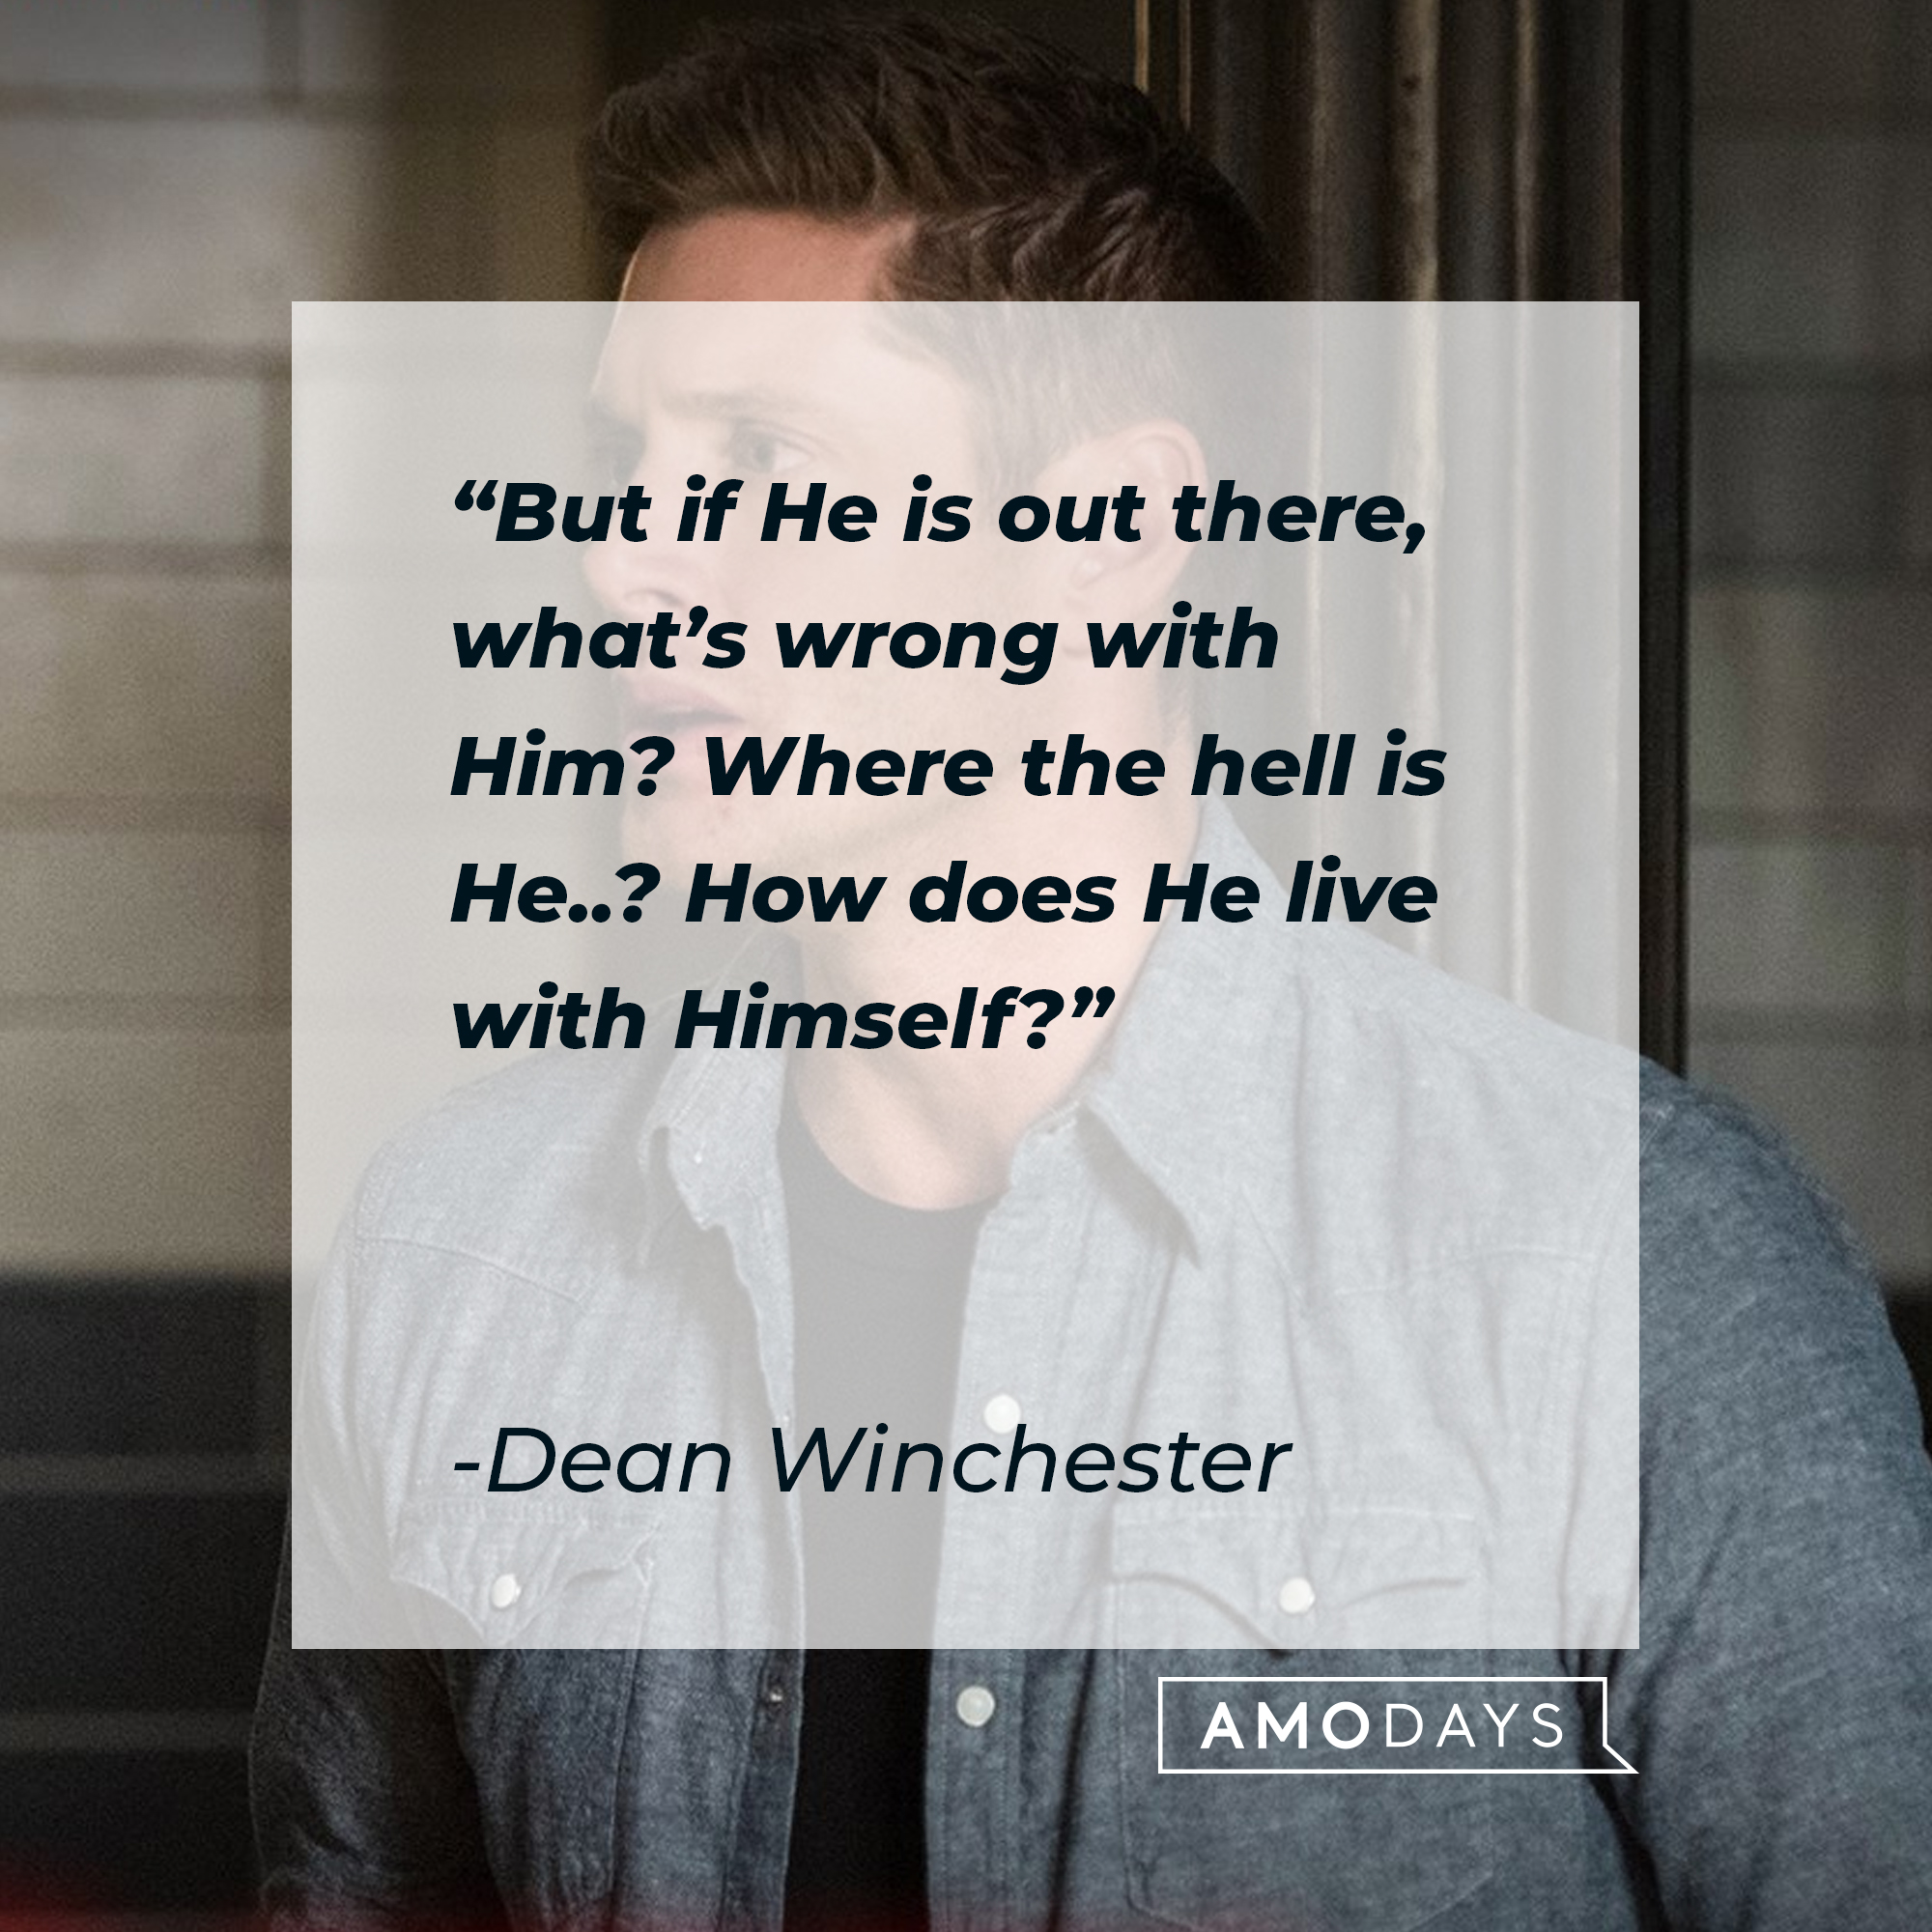 Dean Winchester, with his quote: “But if He is out there, what’s wrong with Him? Where the hell is He..? How does He live with Himself?” | Source: Facebook.com/Supernatural